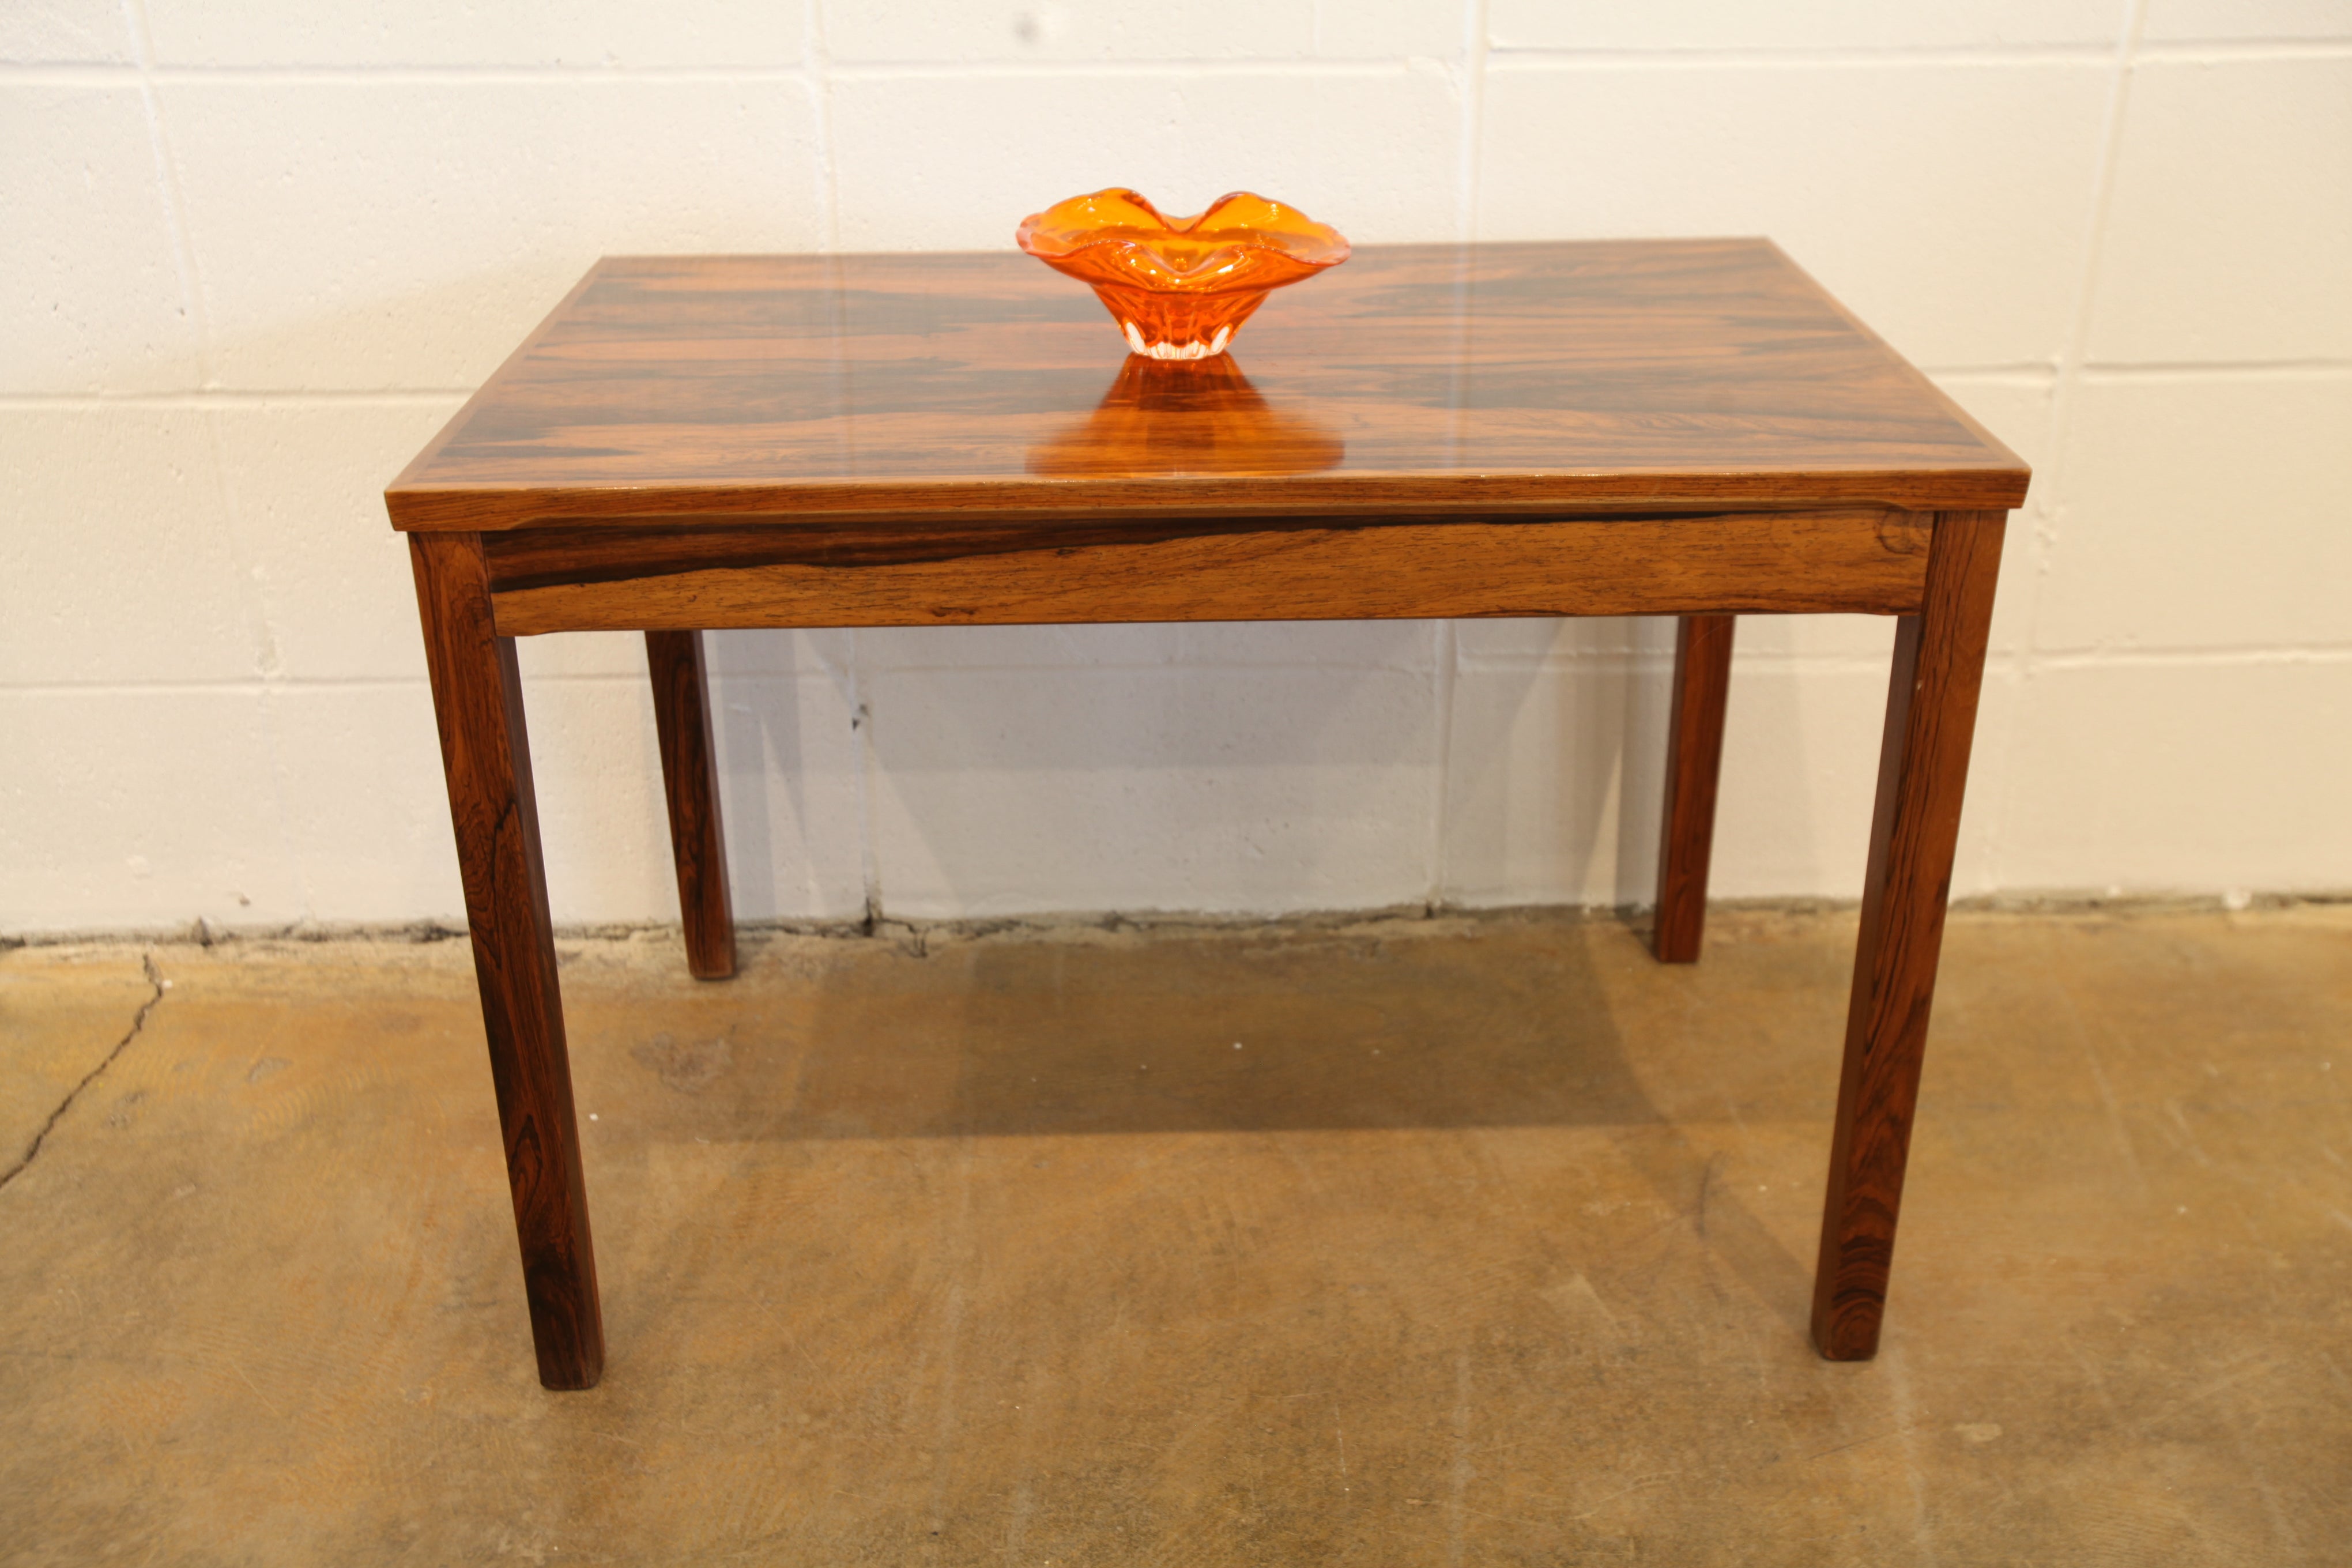 Rare Rosewood End Table (28.25" x 17.75" x 19.75"H)